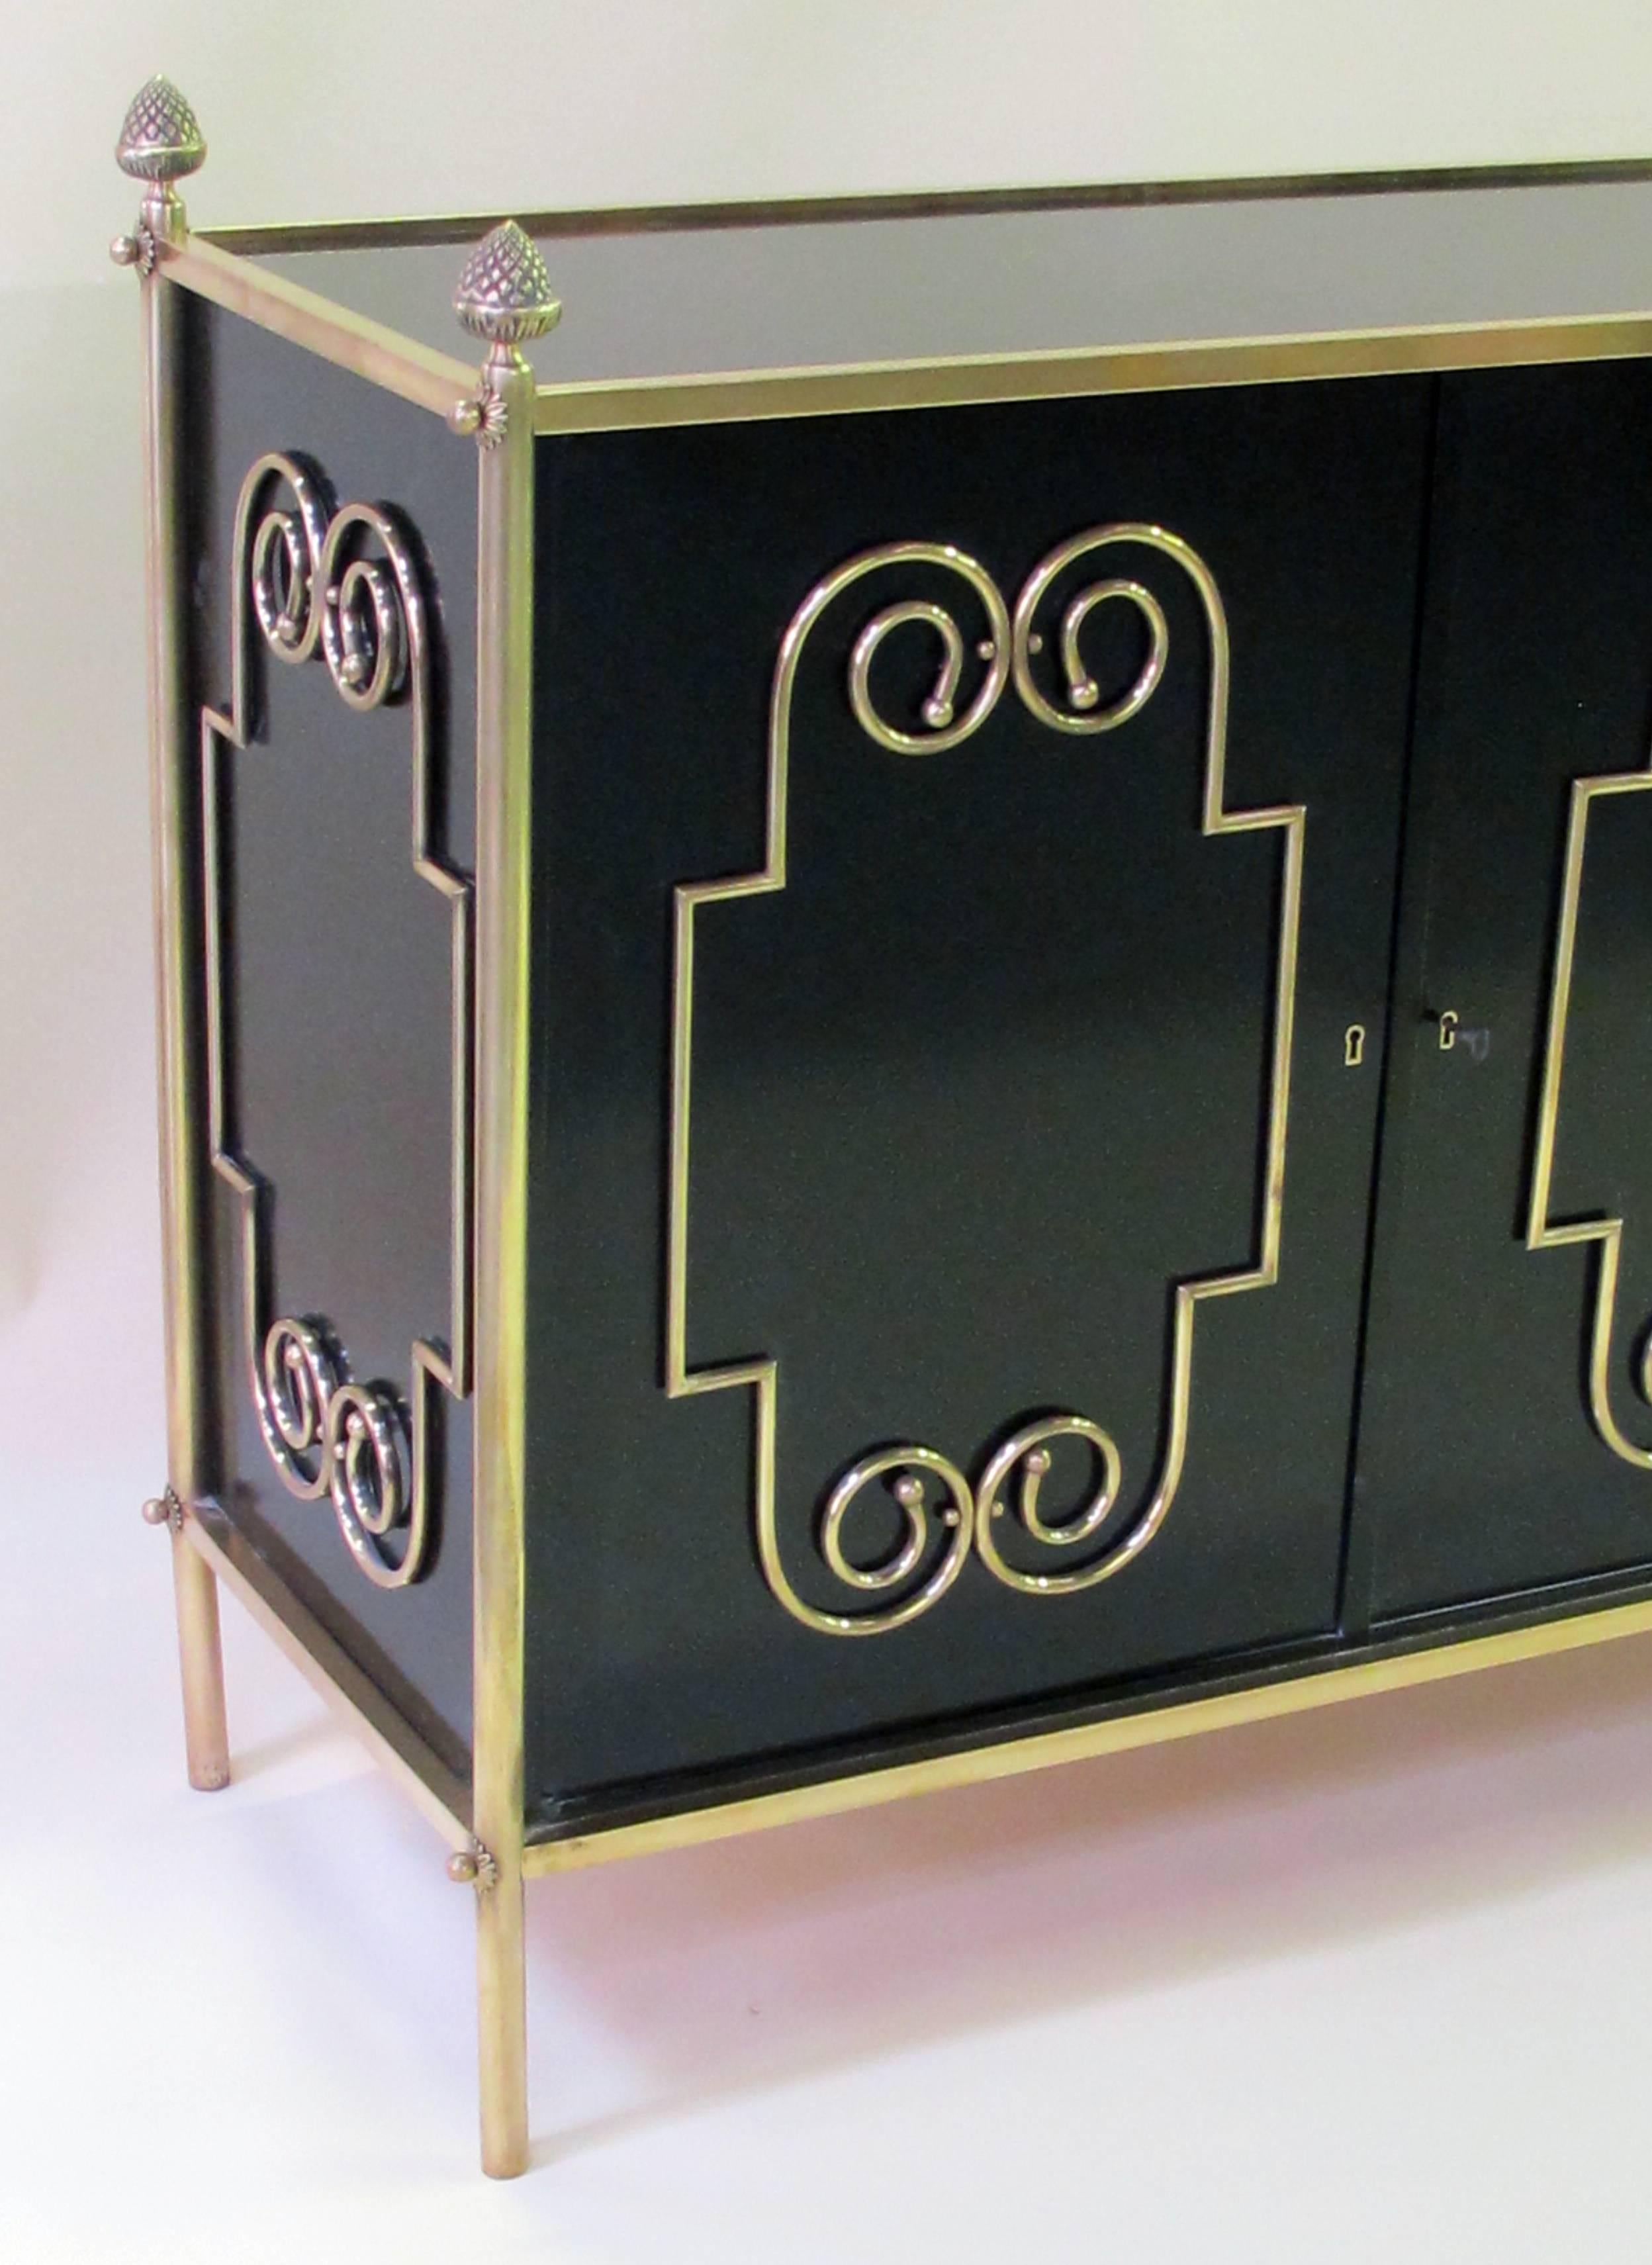 Exquisite American Black Lacquer Three-Door Sideboard by Daniel Jones, Inc., NY In Excellent Condition For Sale In San Francisco, CA